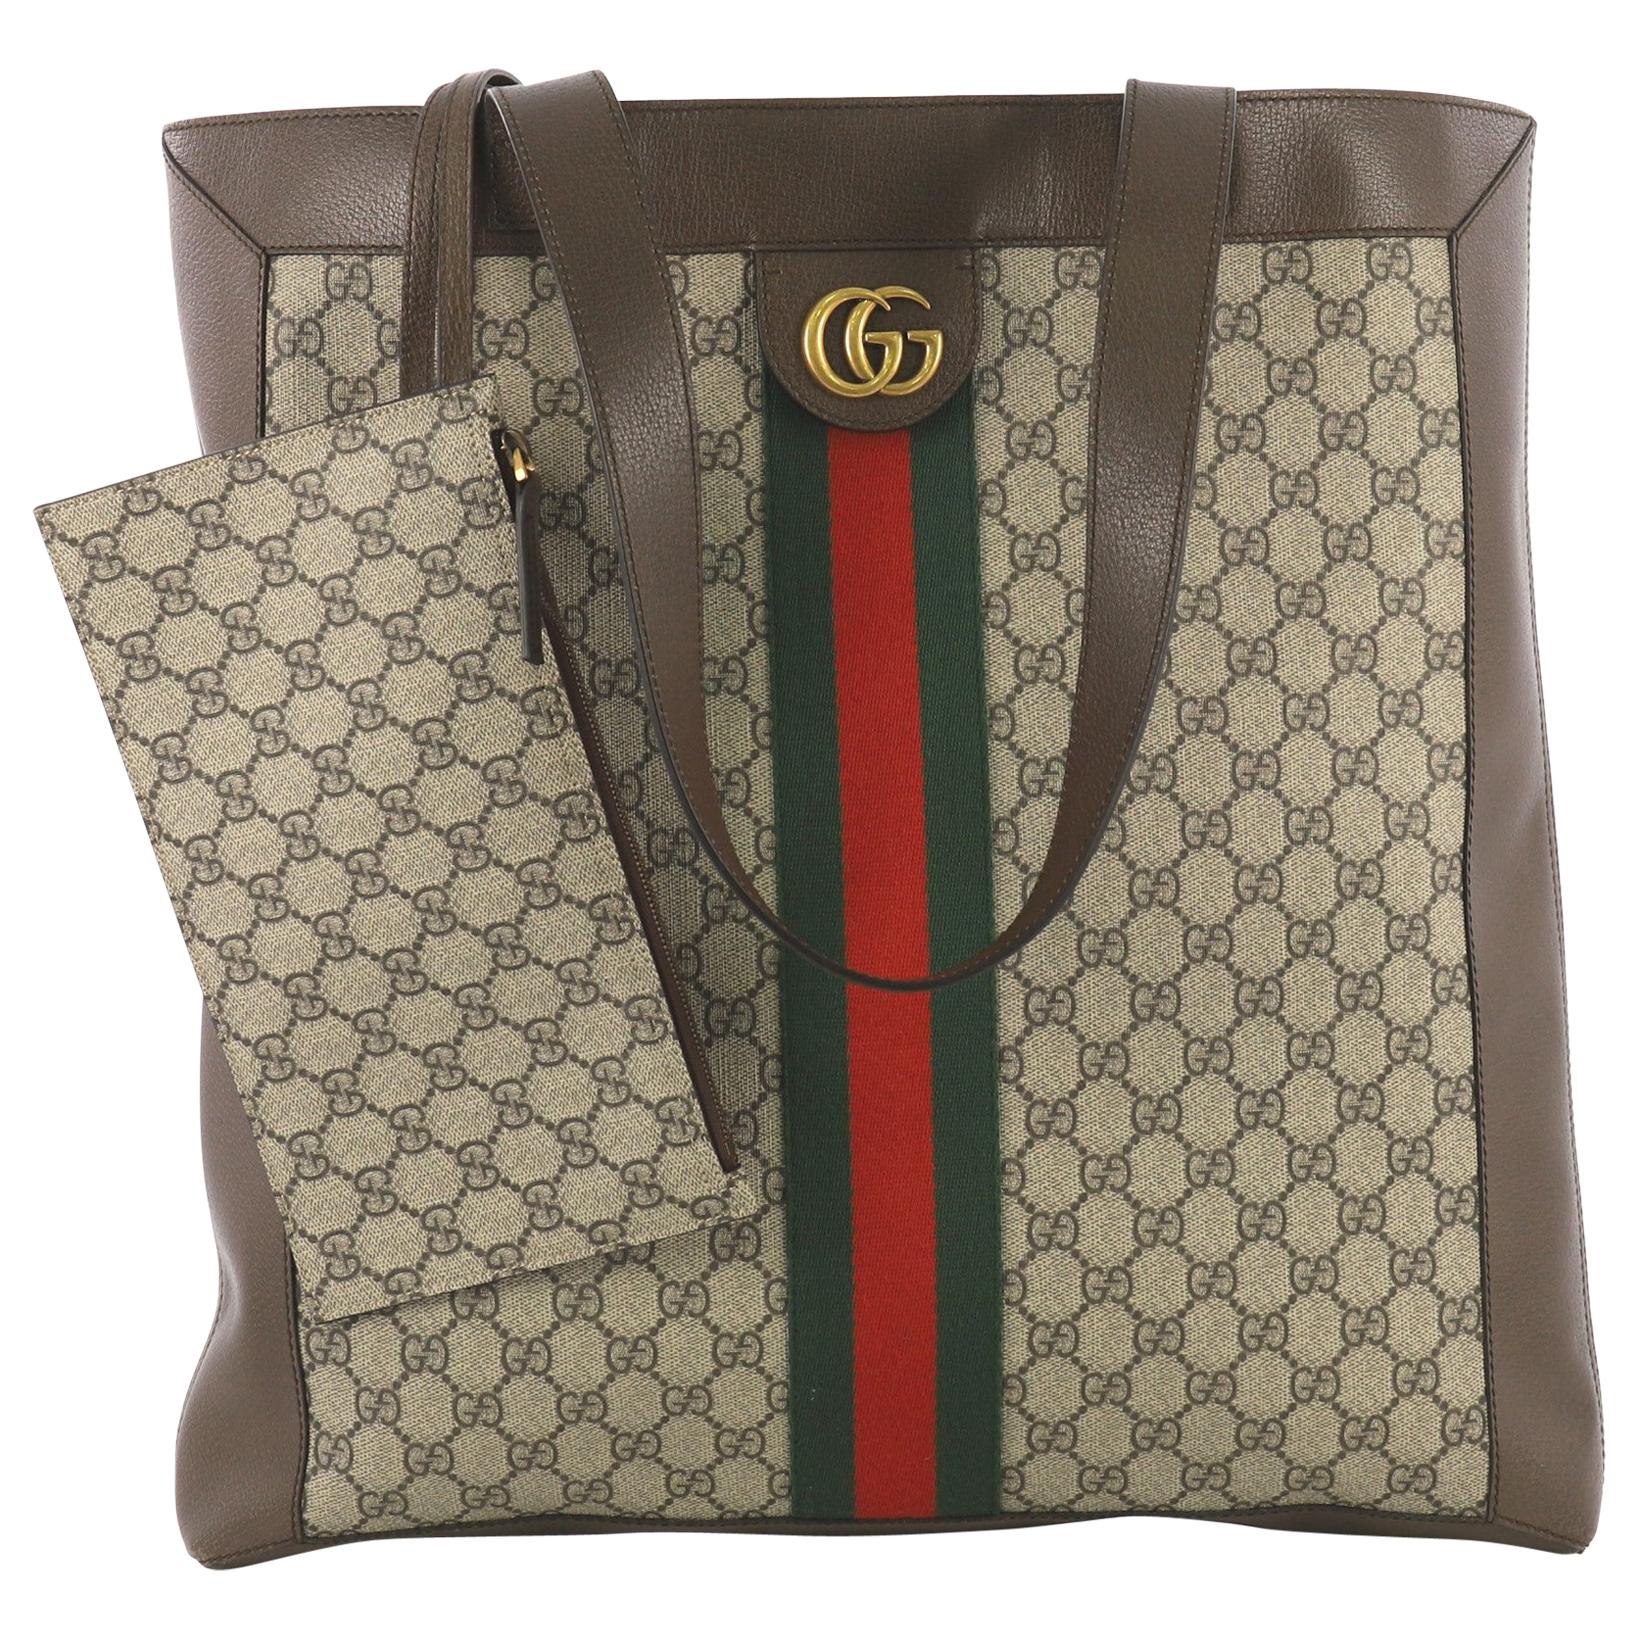 This Gucci Ophidia Soft Open Tote GG Coated Canvas Large, crafted in brown GG coated canvas, features dual leather shoulder straps, Gucci web design, and aged gold-tone hardware. It opens to a nude microfiber interior. 

Estimated Retail Price: